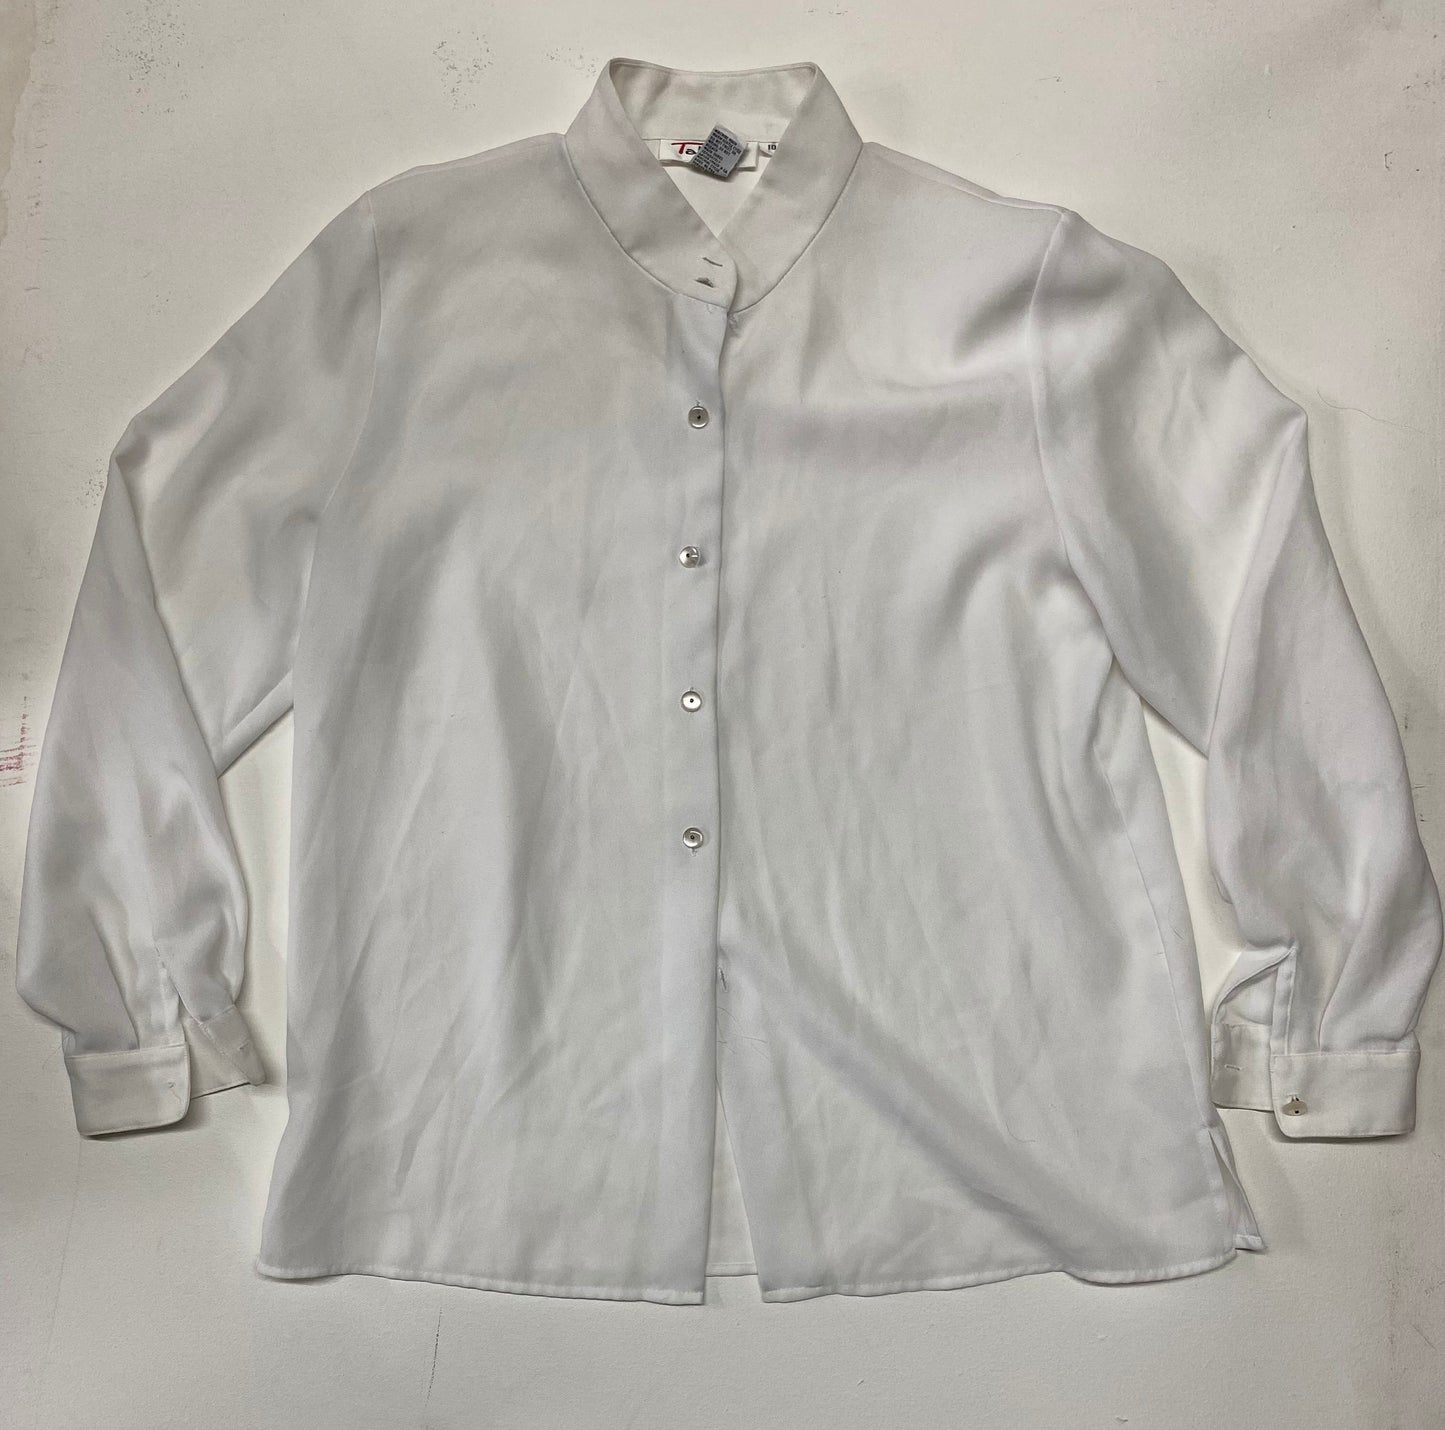 "Talbots" White Sheer Button Up Size 10